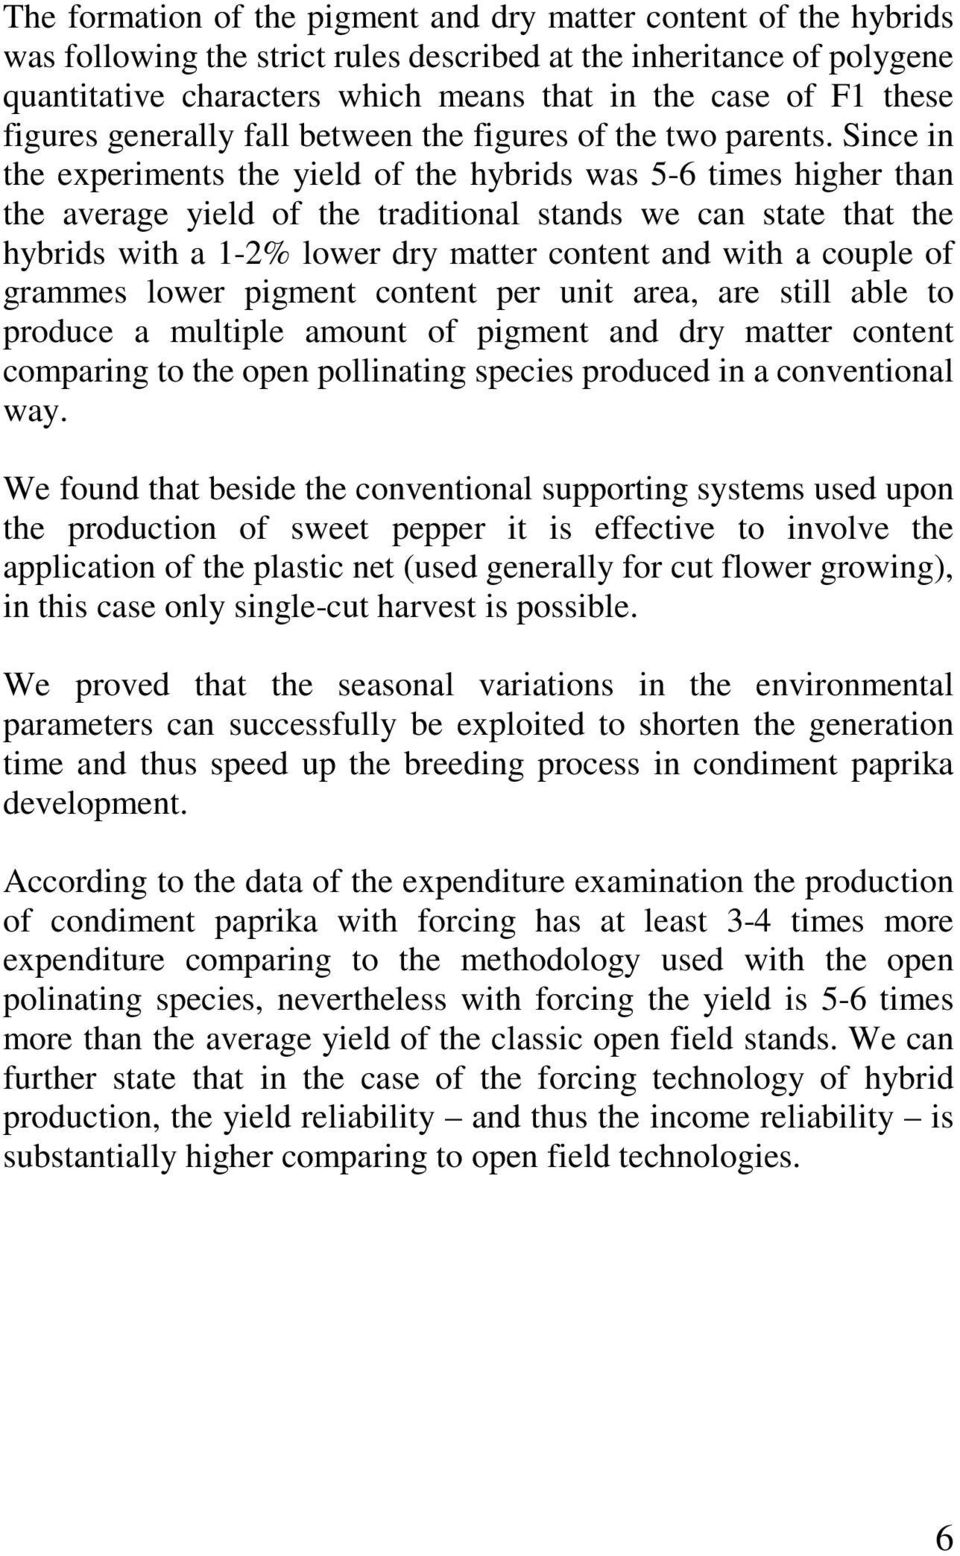 Since in the experiments the yield of the hybrids was 5-6 times higher than the average yield of the traditional stands we can state that the hybrids with a 1-2% lower dry matter content and with a